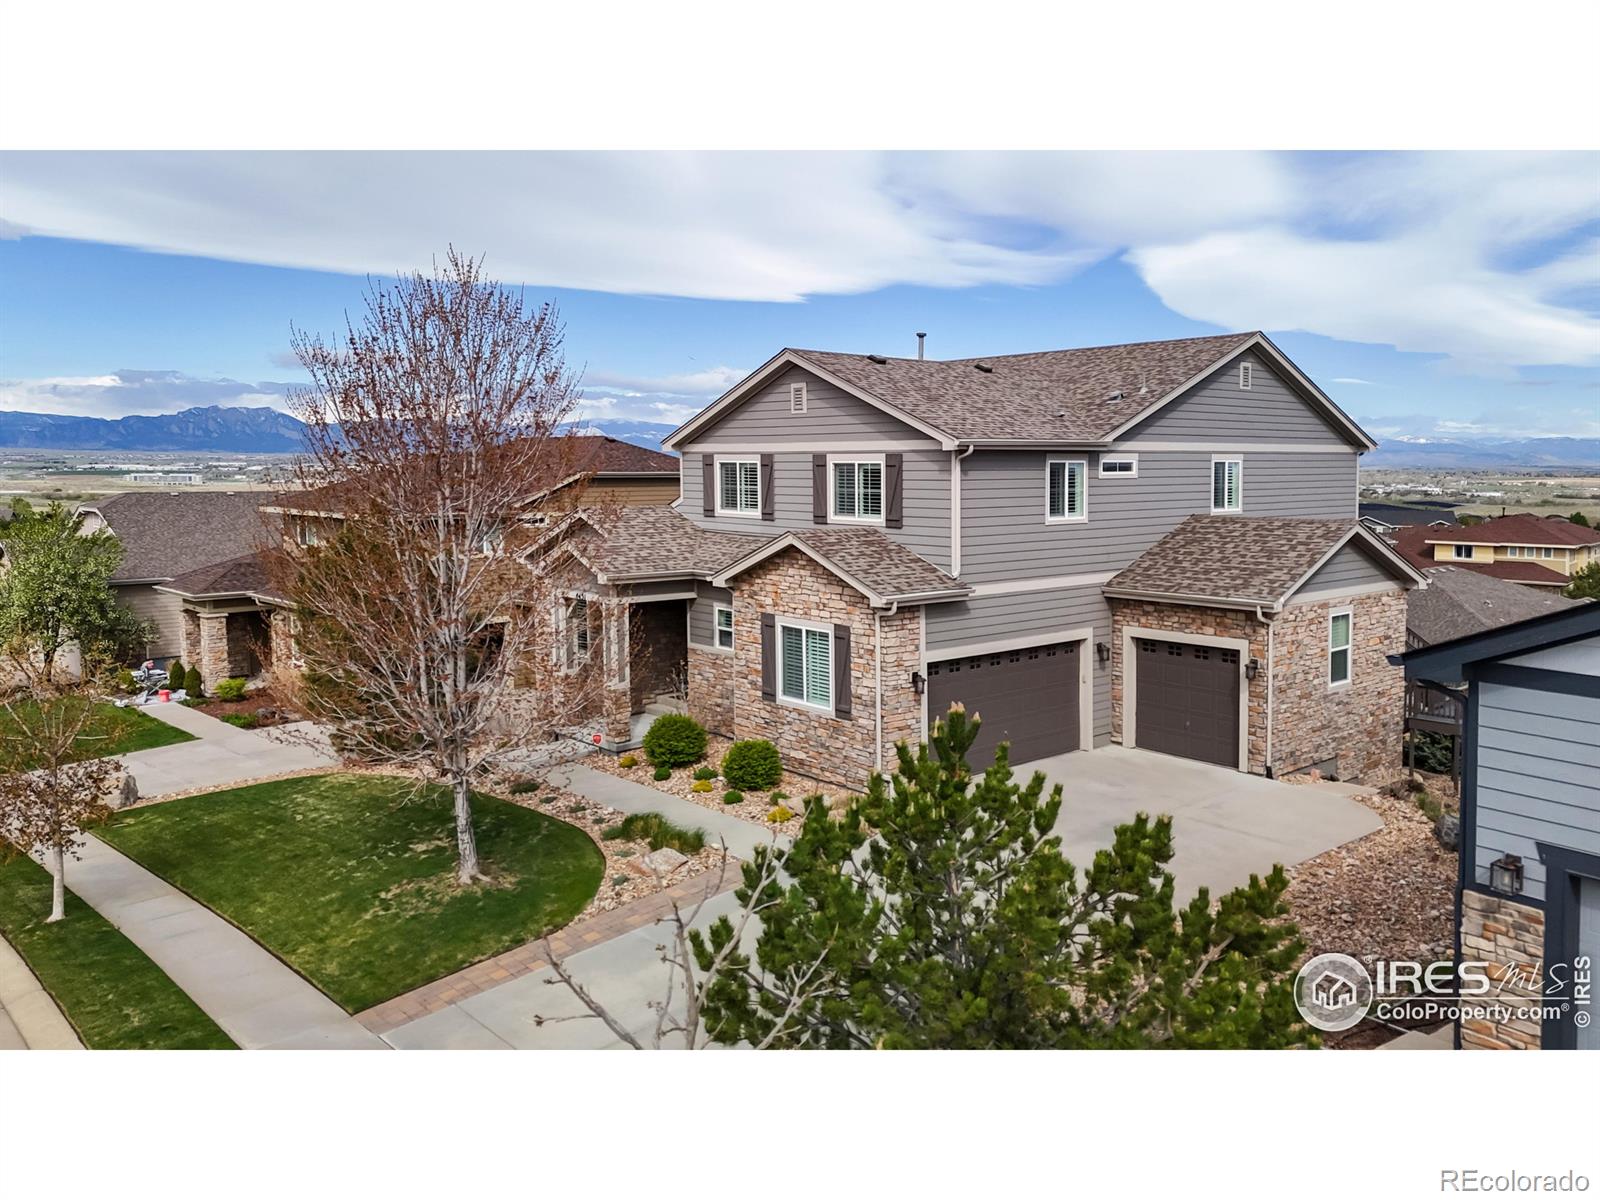 4451  Tanager Trail, broomfield MLS: 4567891008615 Beds: 5 Baths: 4 Price: $1,200,000